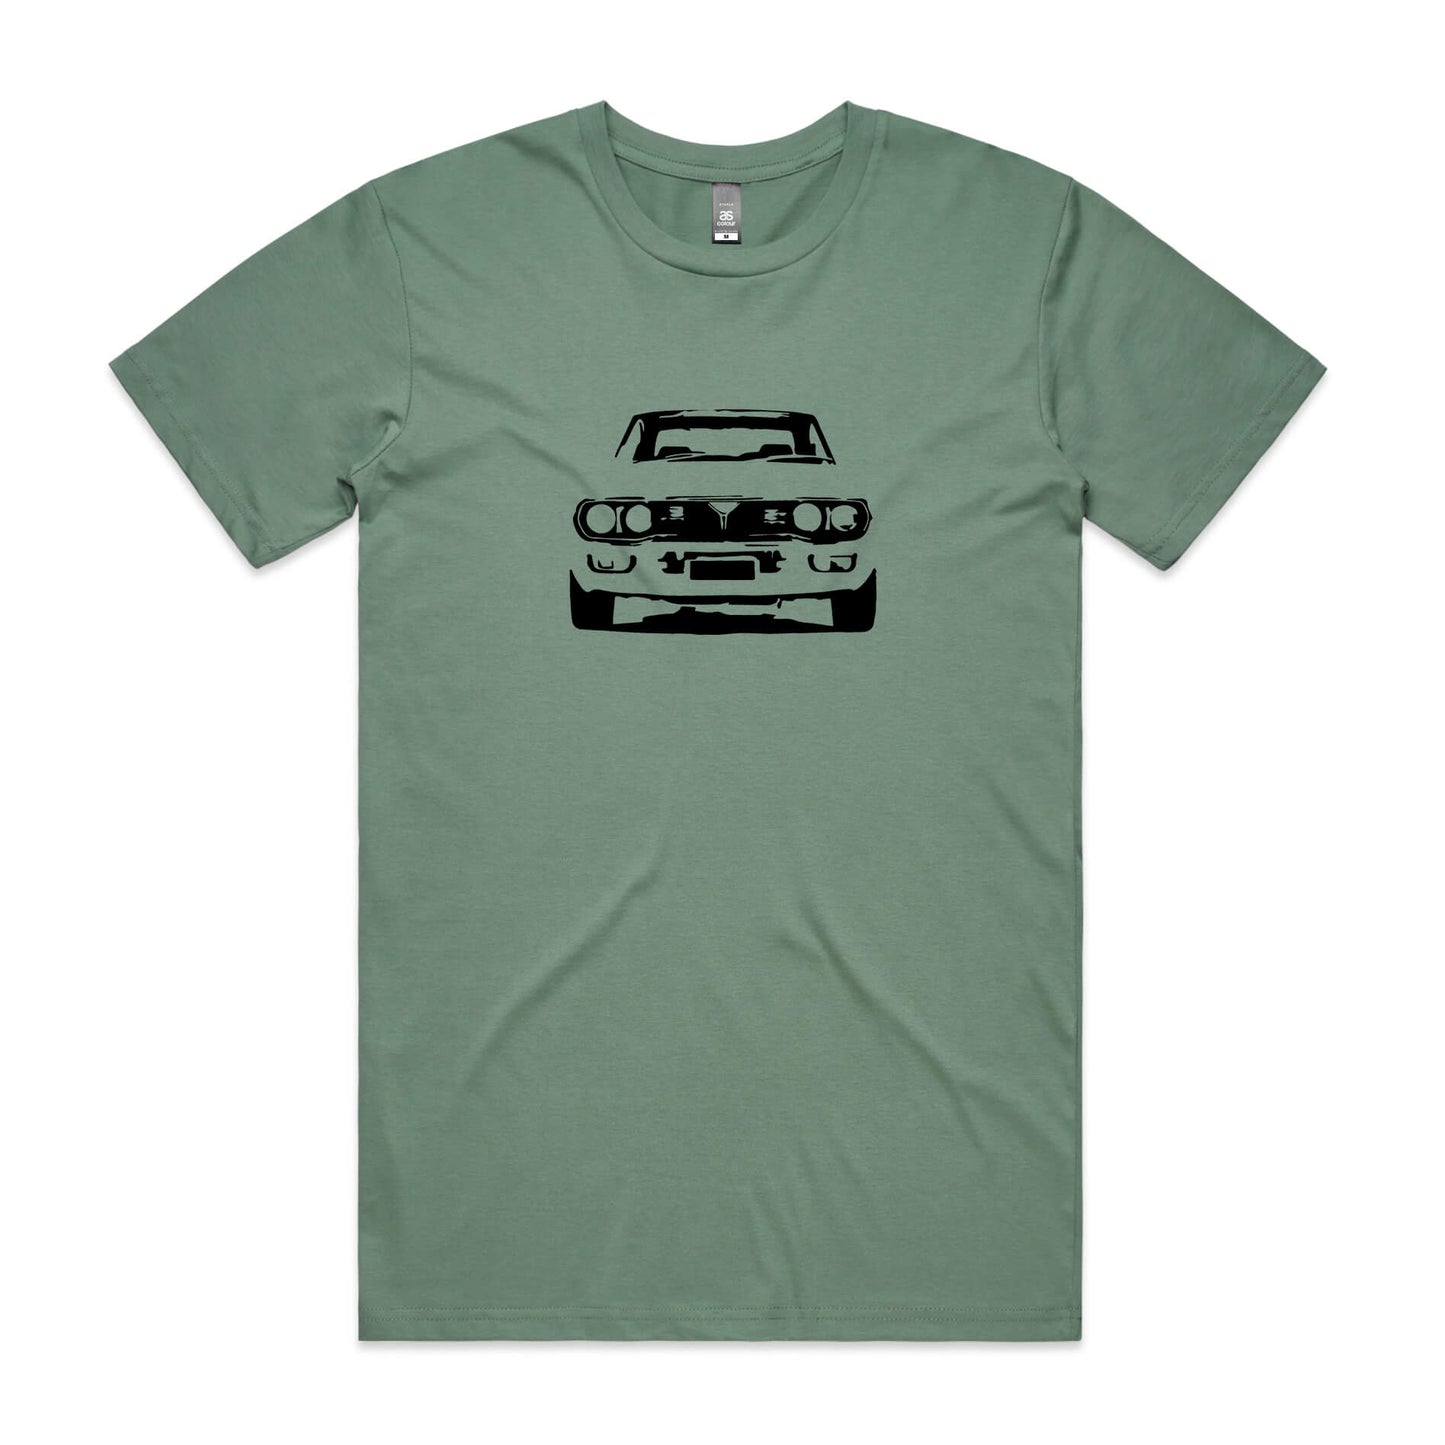 Mazda RX4 t-shirt in sage green with black rotary engine car graphic